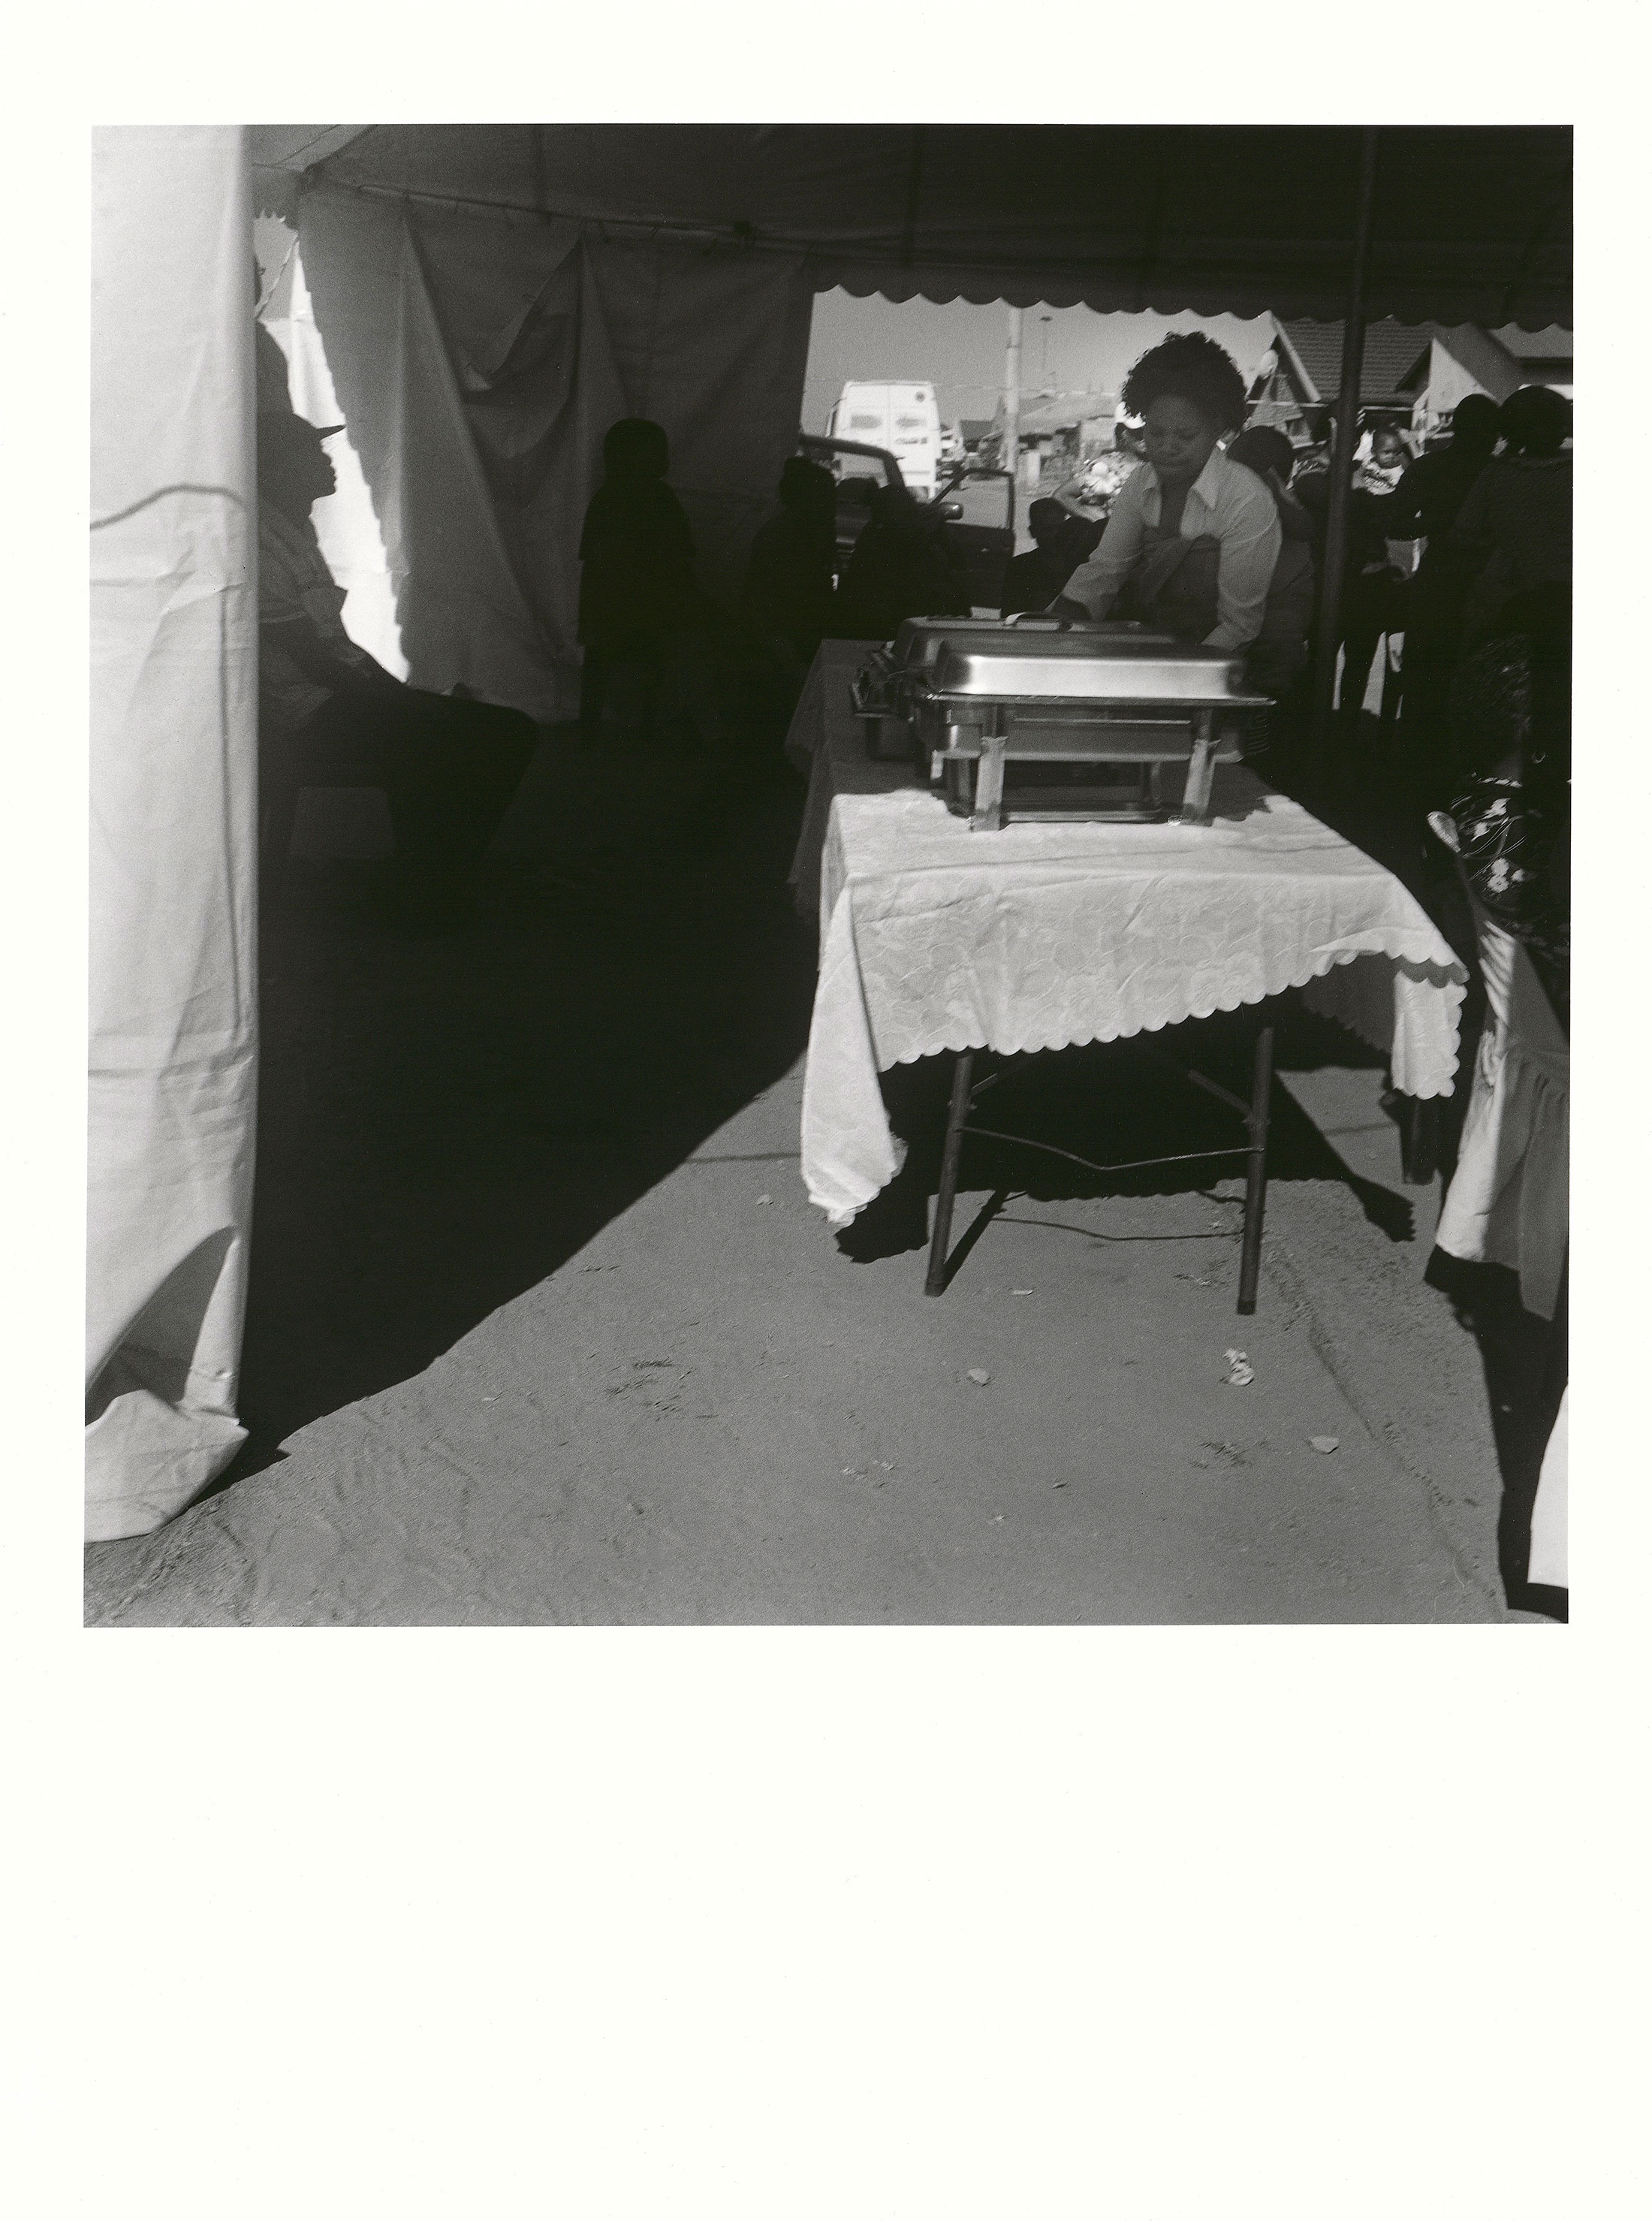 Sabelo Mlangeni’s ‘Buffet catering in silver, Witbank’, a black and white photograph that depicts a wedding buffet in a tent.
